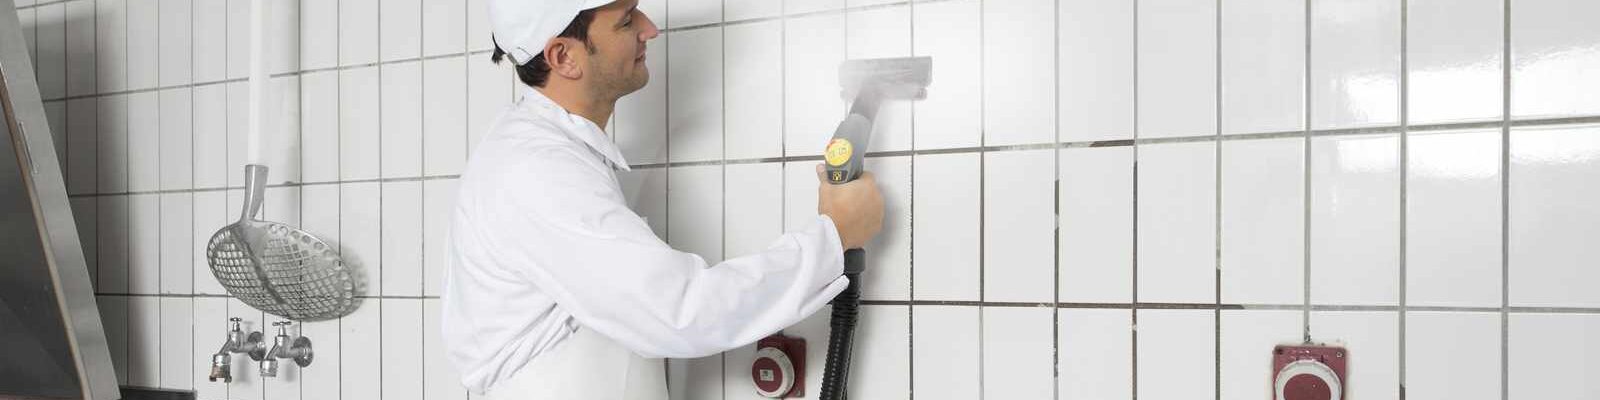 steam cleaning tiled walls in a commercial kitchen